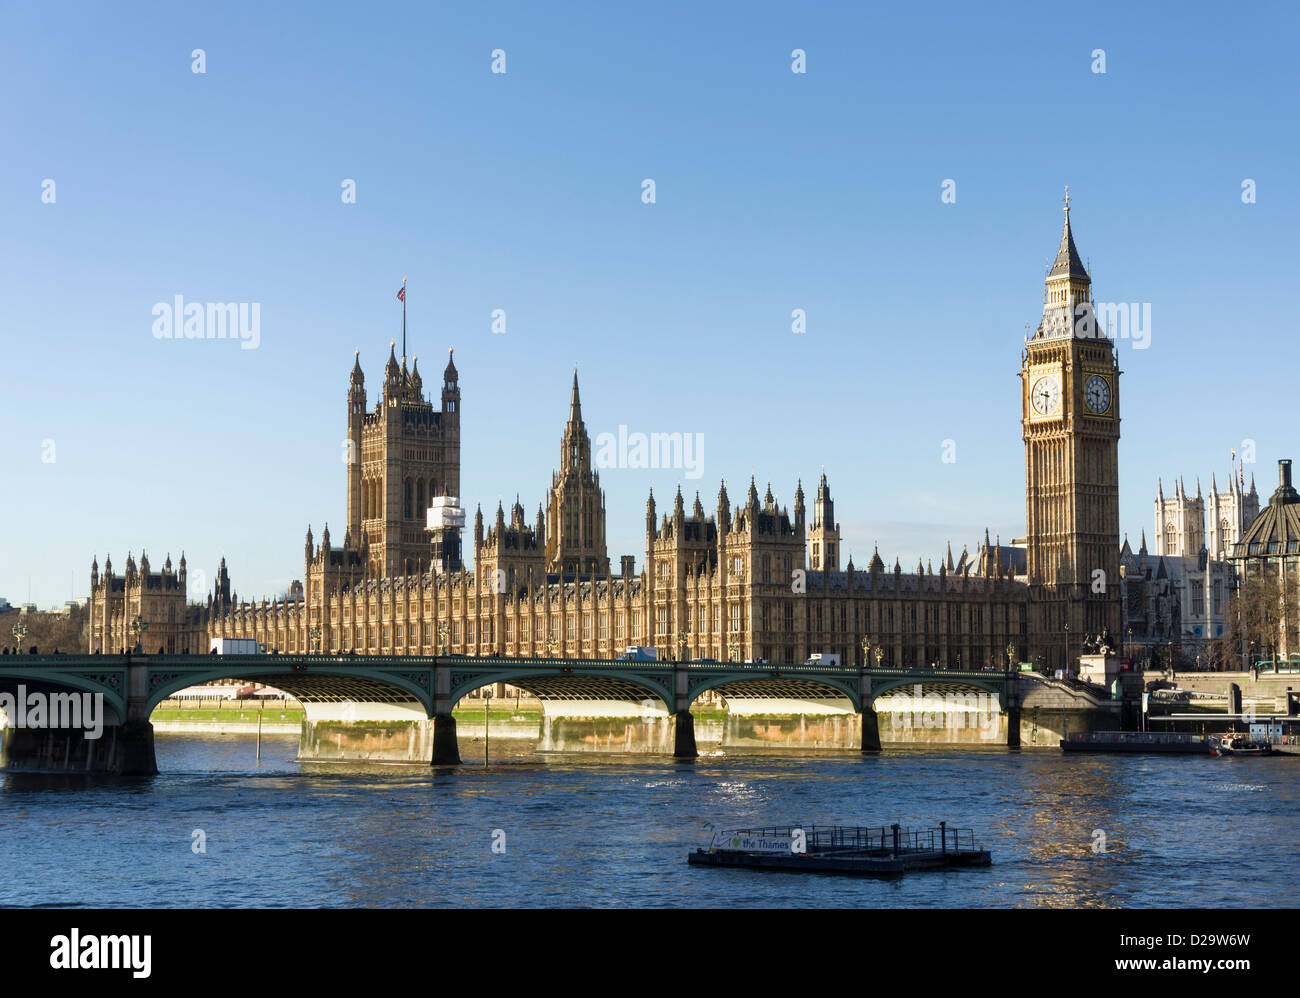 Houses of Parliament and Big Ben, London, England, UK - seen from the South bank of the River Thames Stock Photo